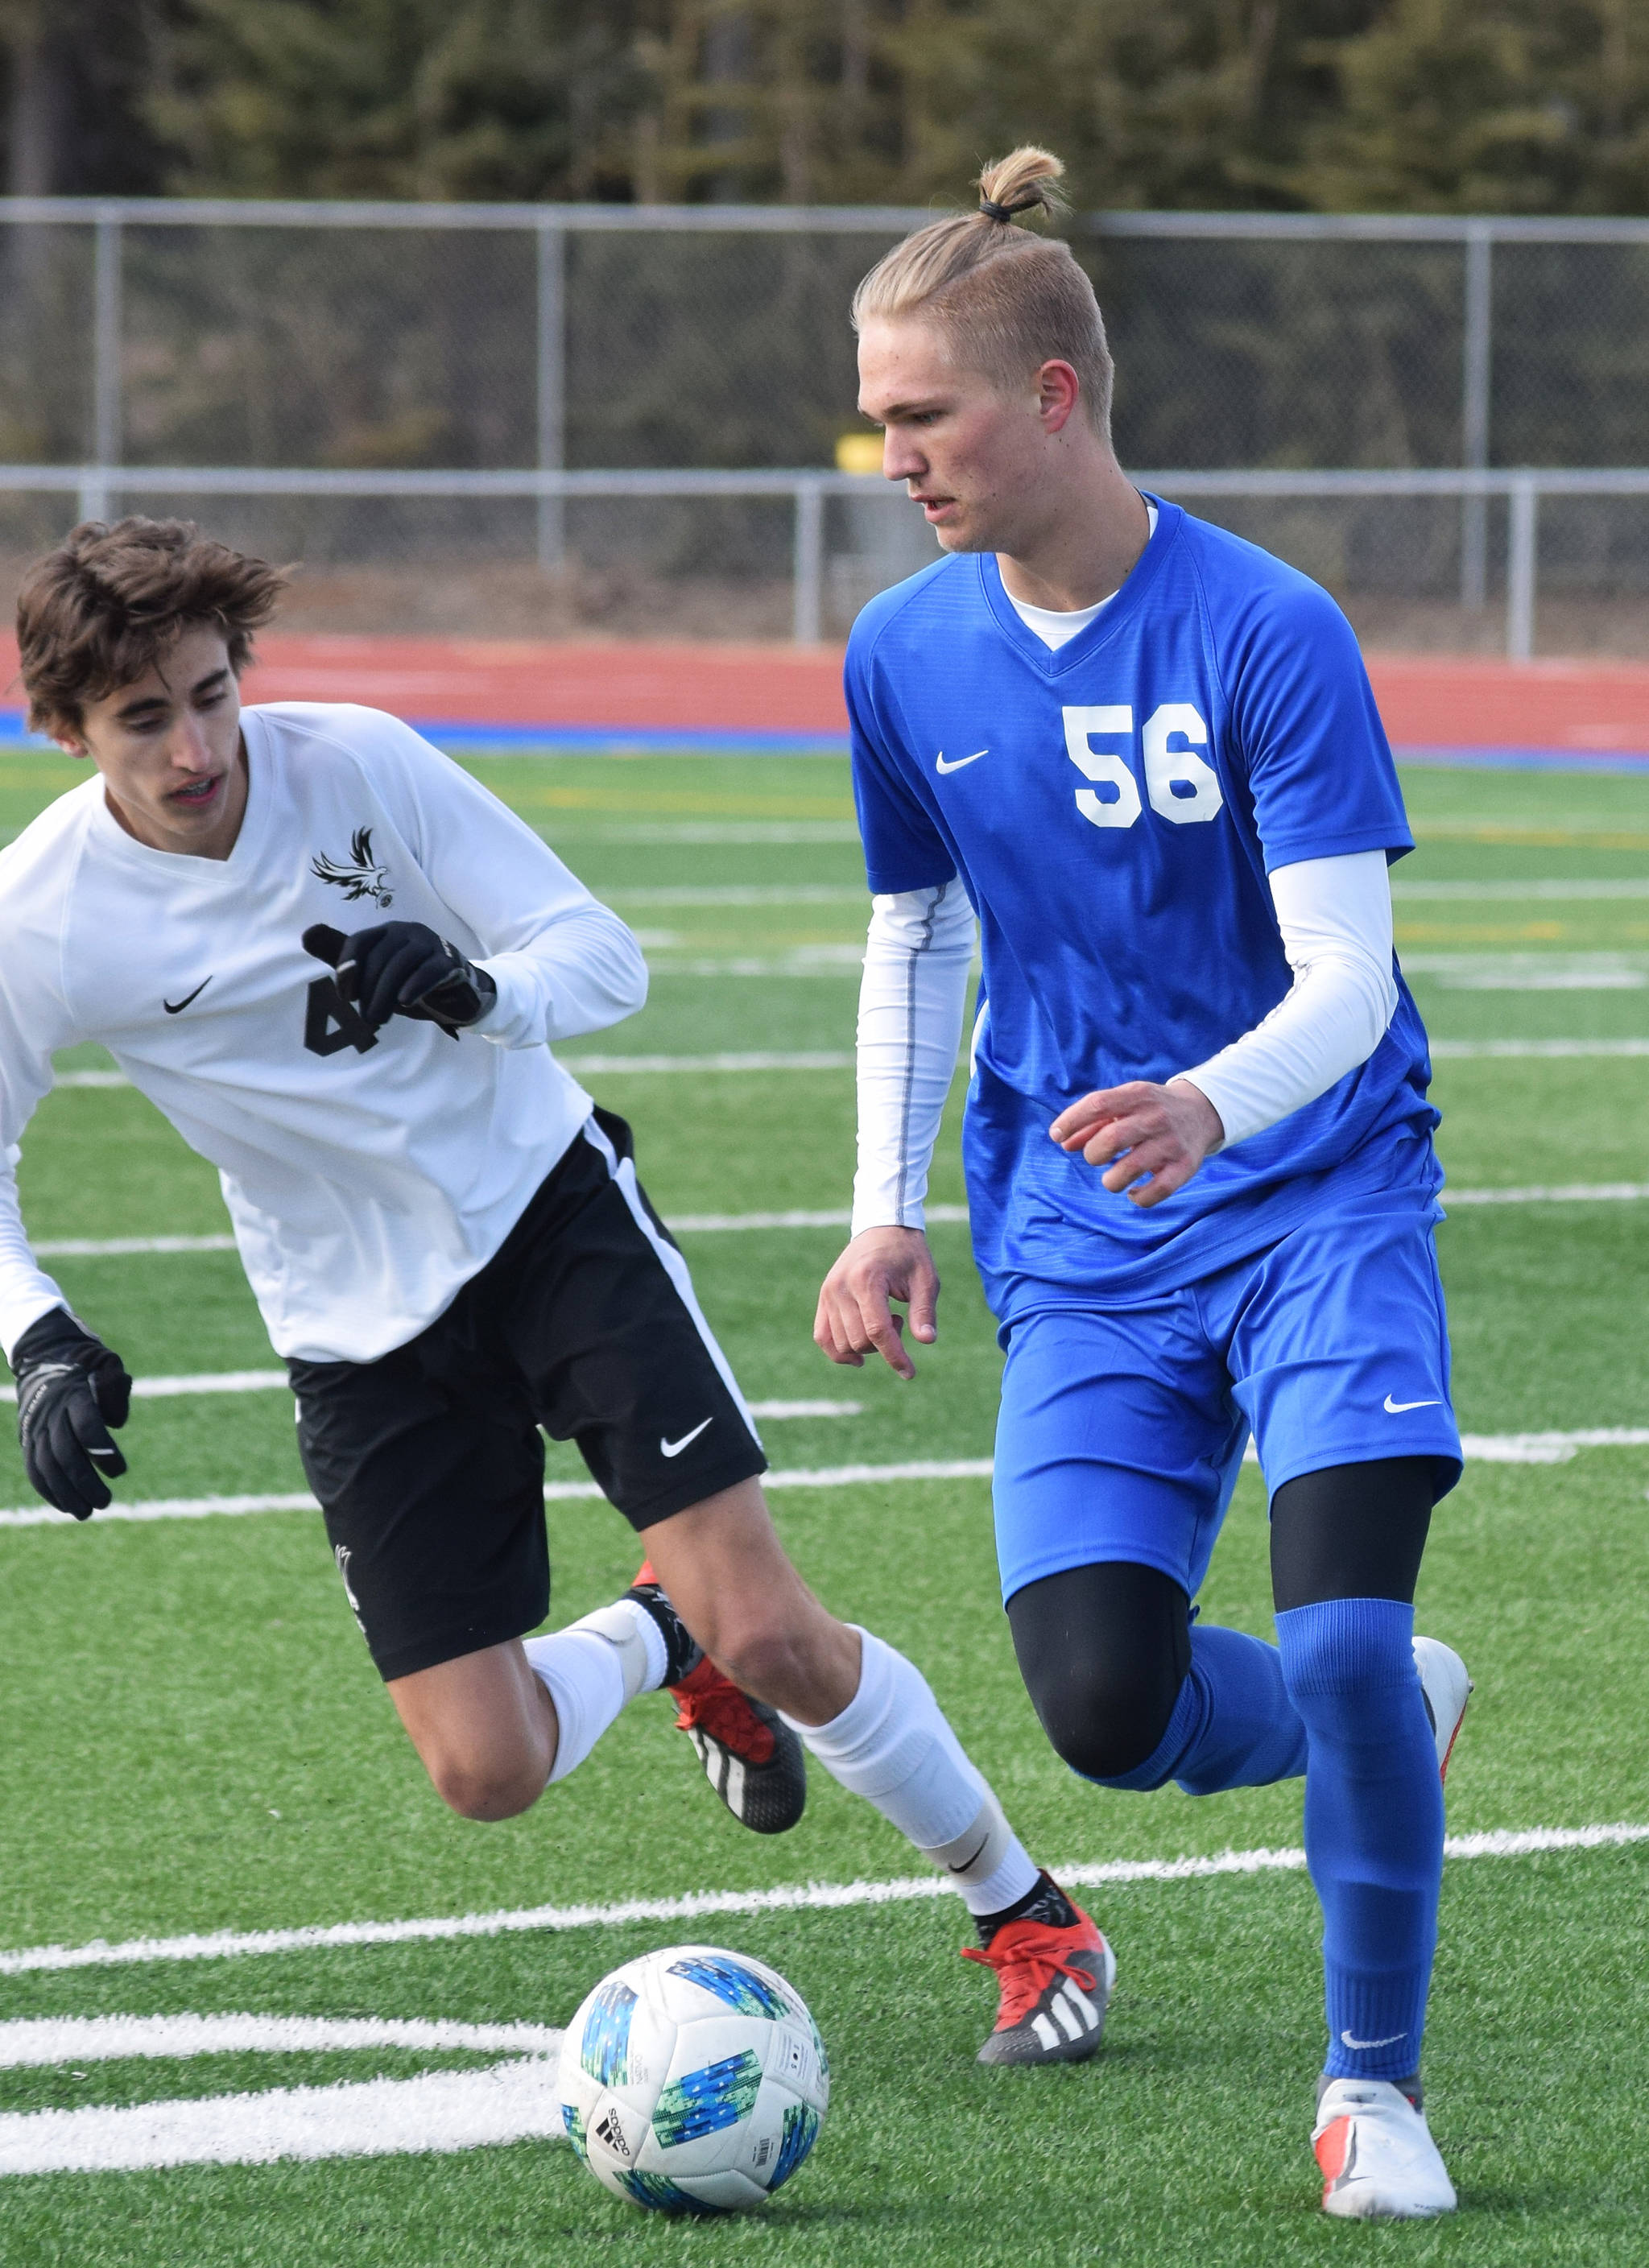 Soldotna senior Kaleb Swank dribbles around a West Anchorage defender Friday, April 5, 2019, at Soldotna’s Justin Maile Field. (Photo by Joey Klecka/Peninsula Clarion)